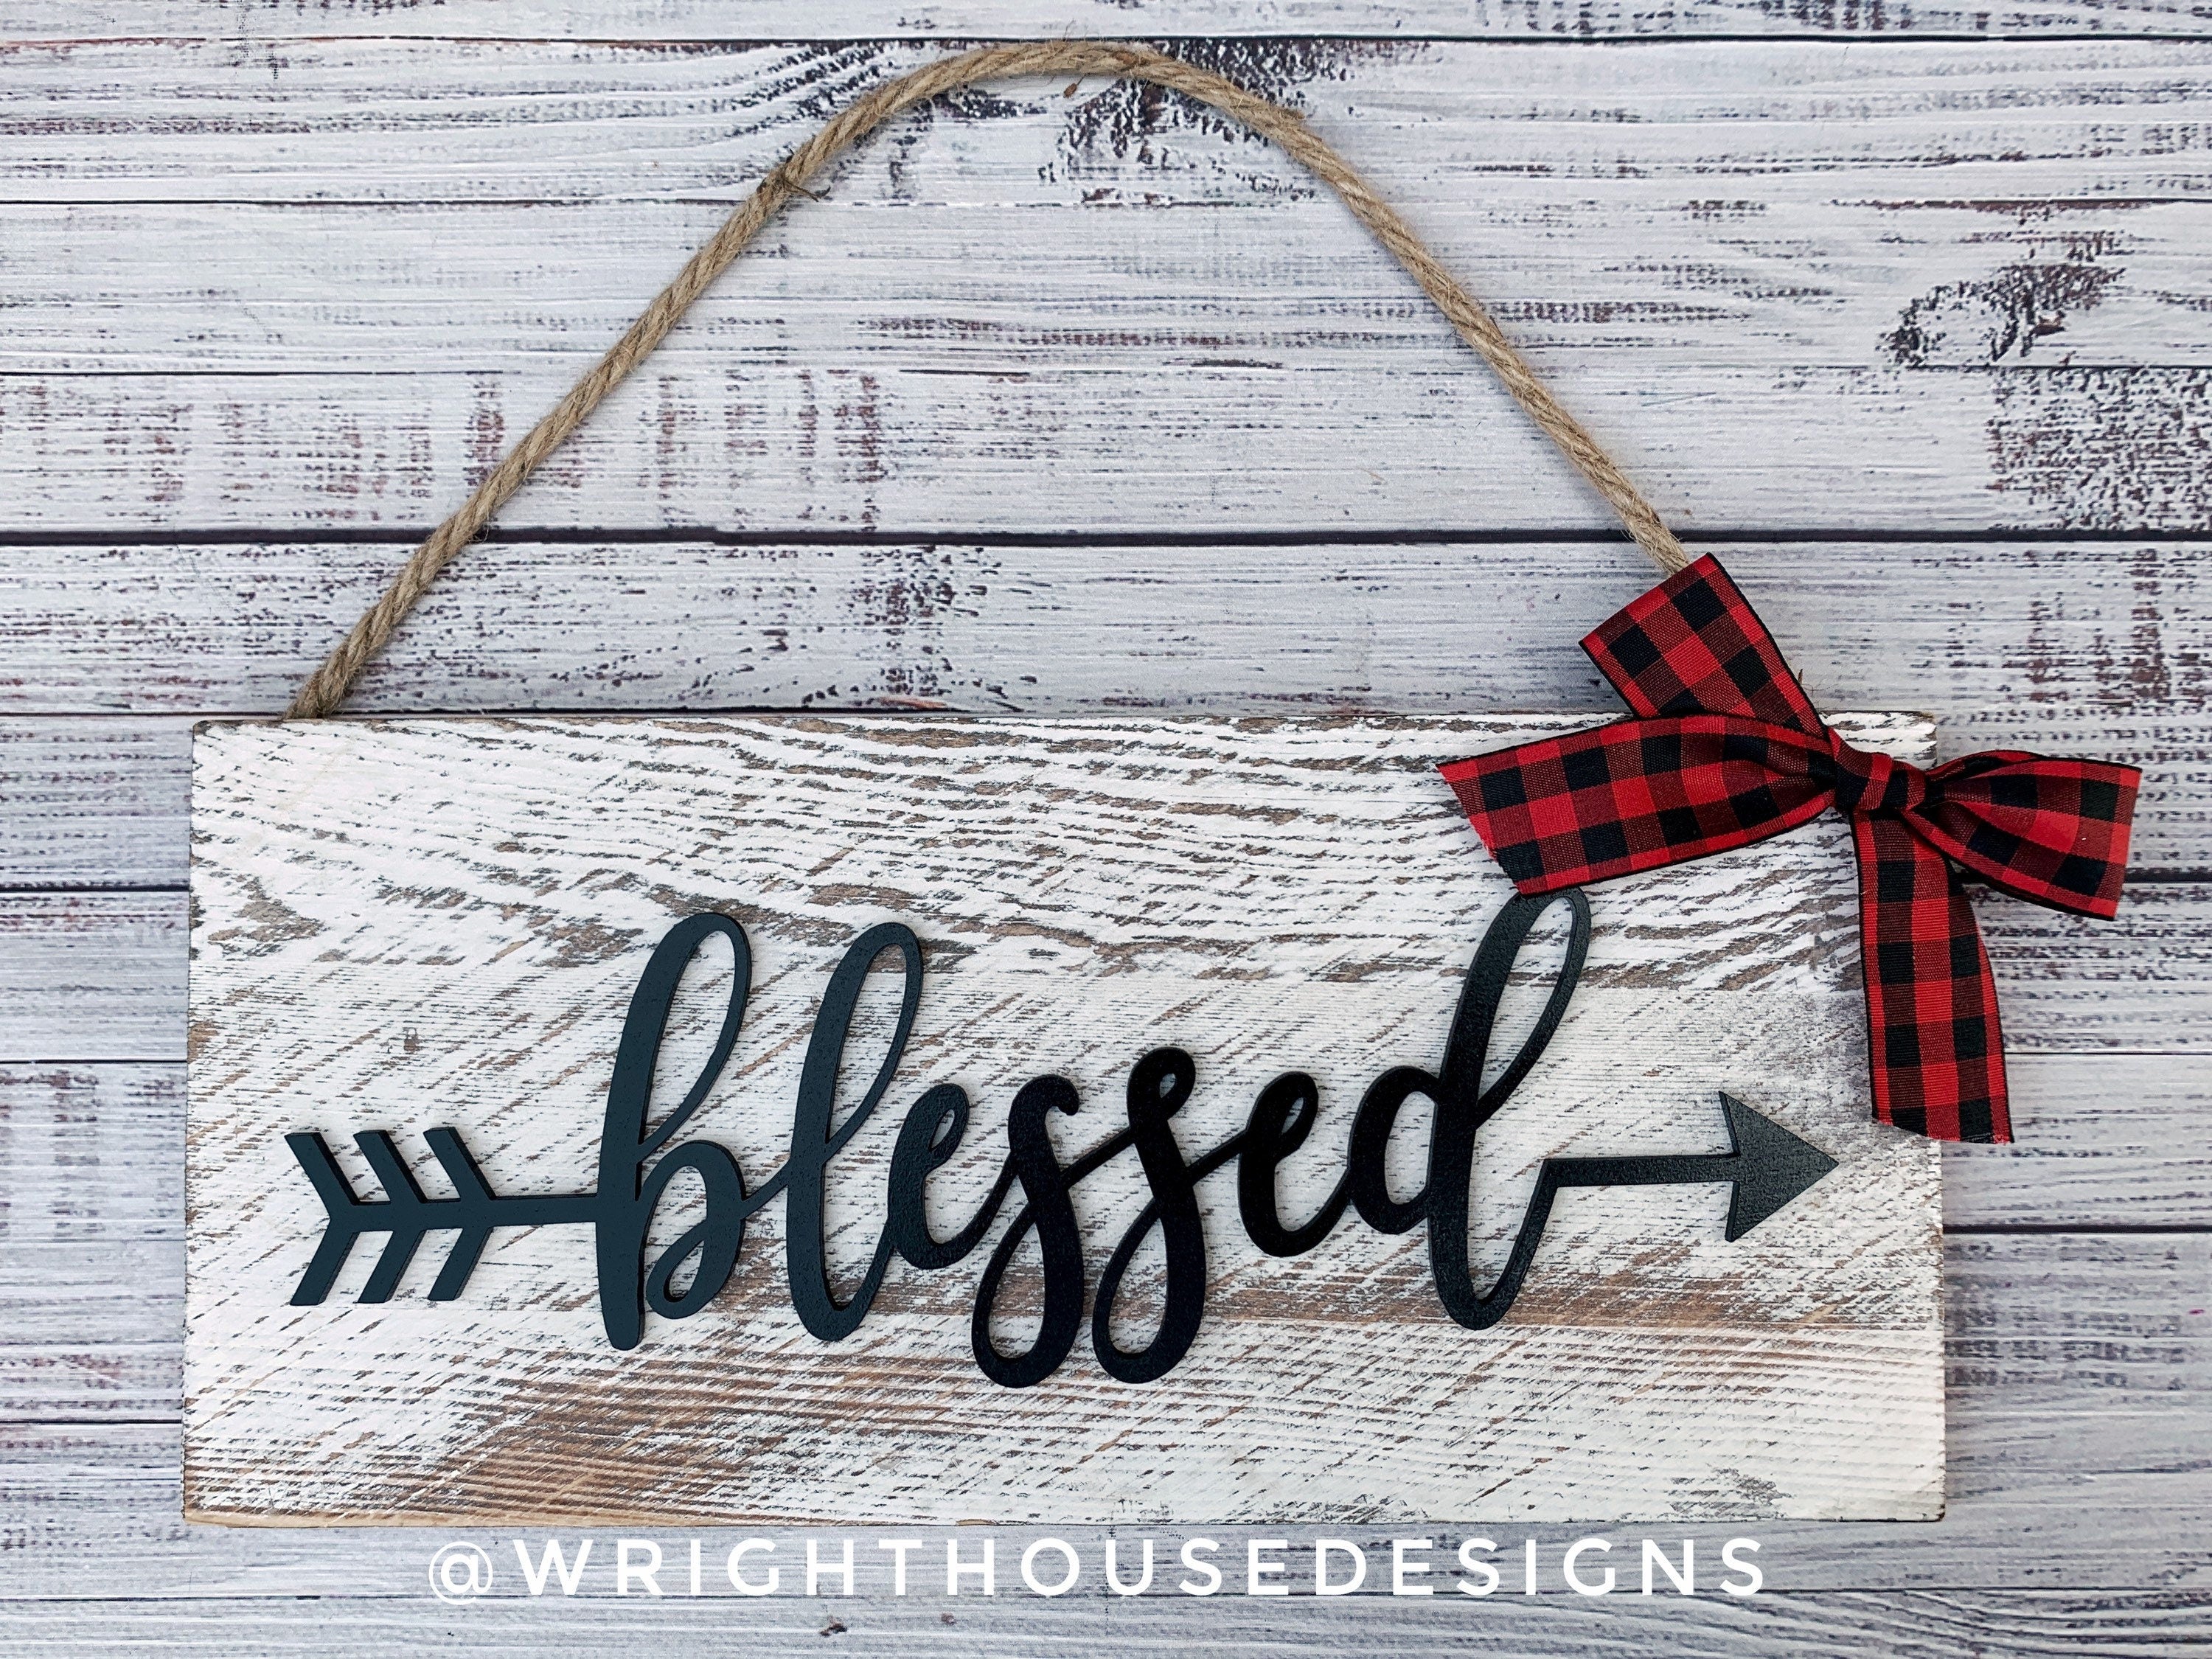 Blessed Arrow Word Art - Rustic Farmhouse - Whitewash Reclaimed Wood Plank Board Sign - Wooden Wall Art - Home Decor and She Shed Signs